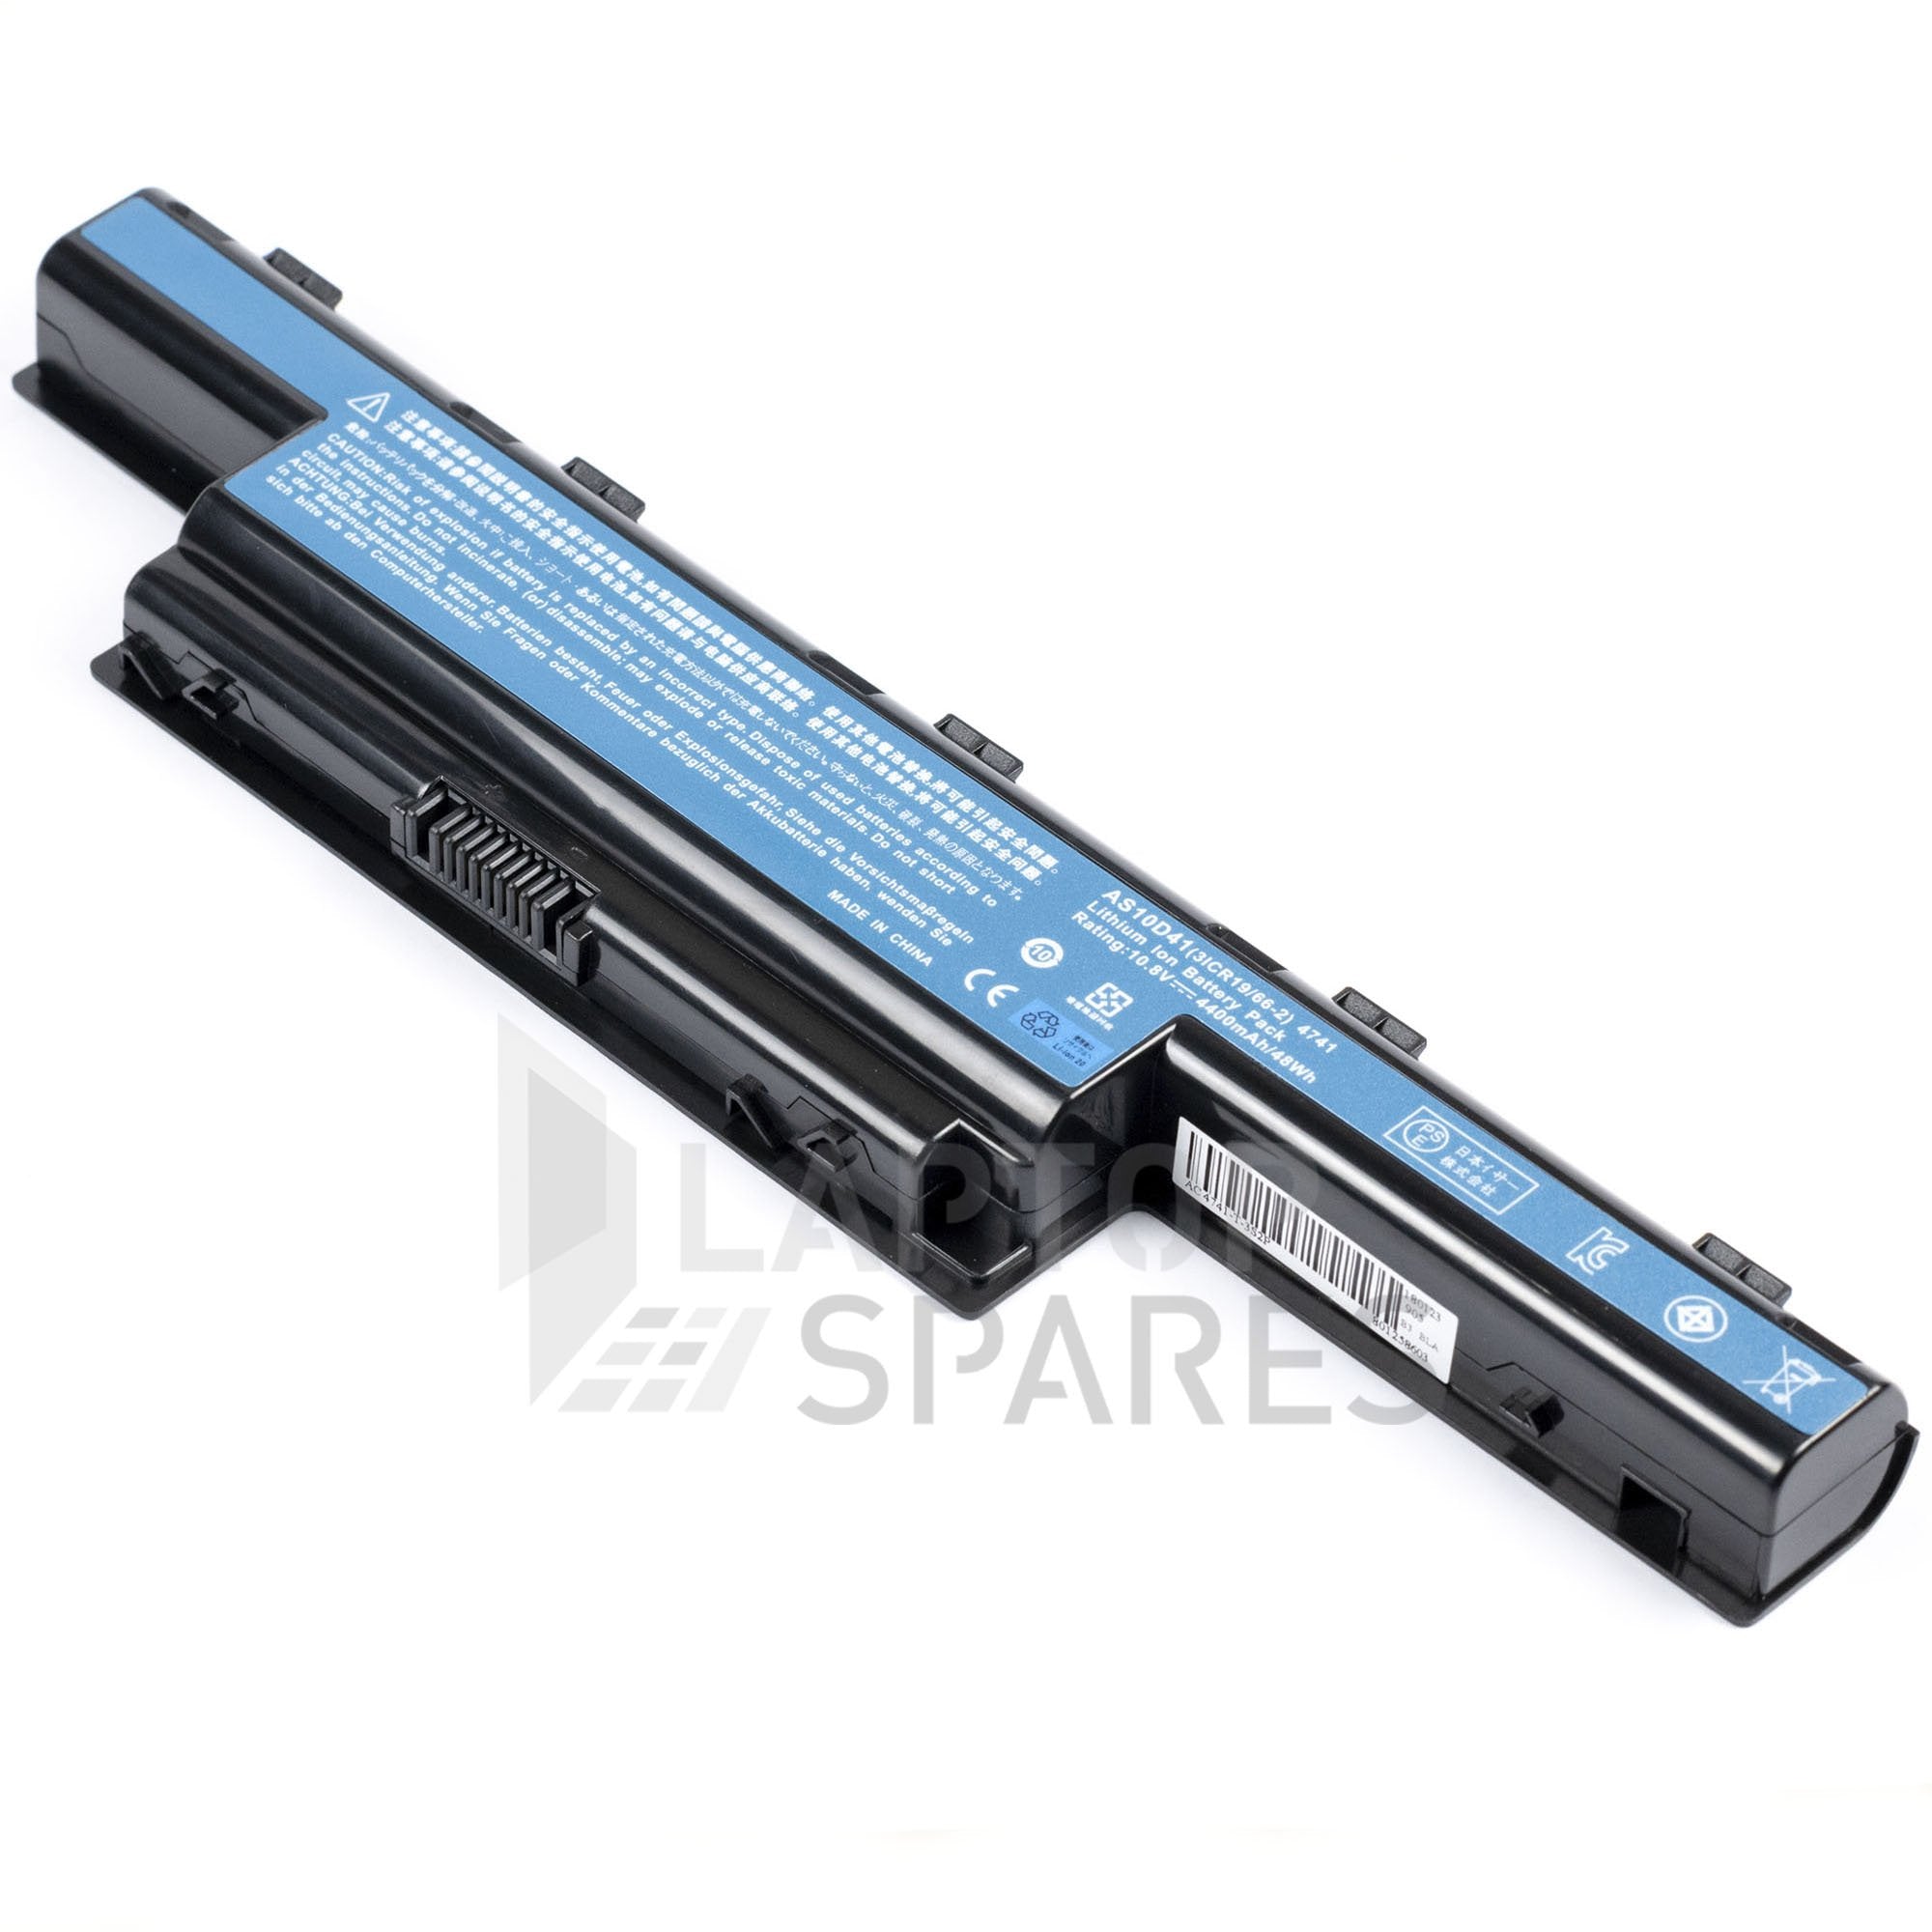 option heart world Acer AS10D31 AS10D41 AS10D51 6 Cell Laptop Battery in Pakistan